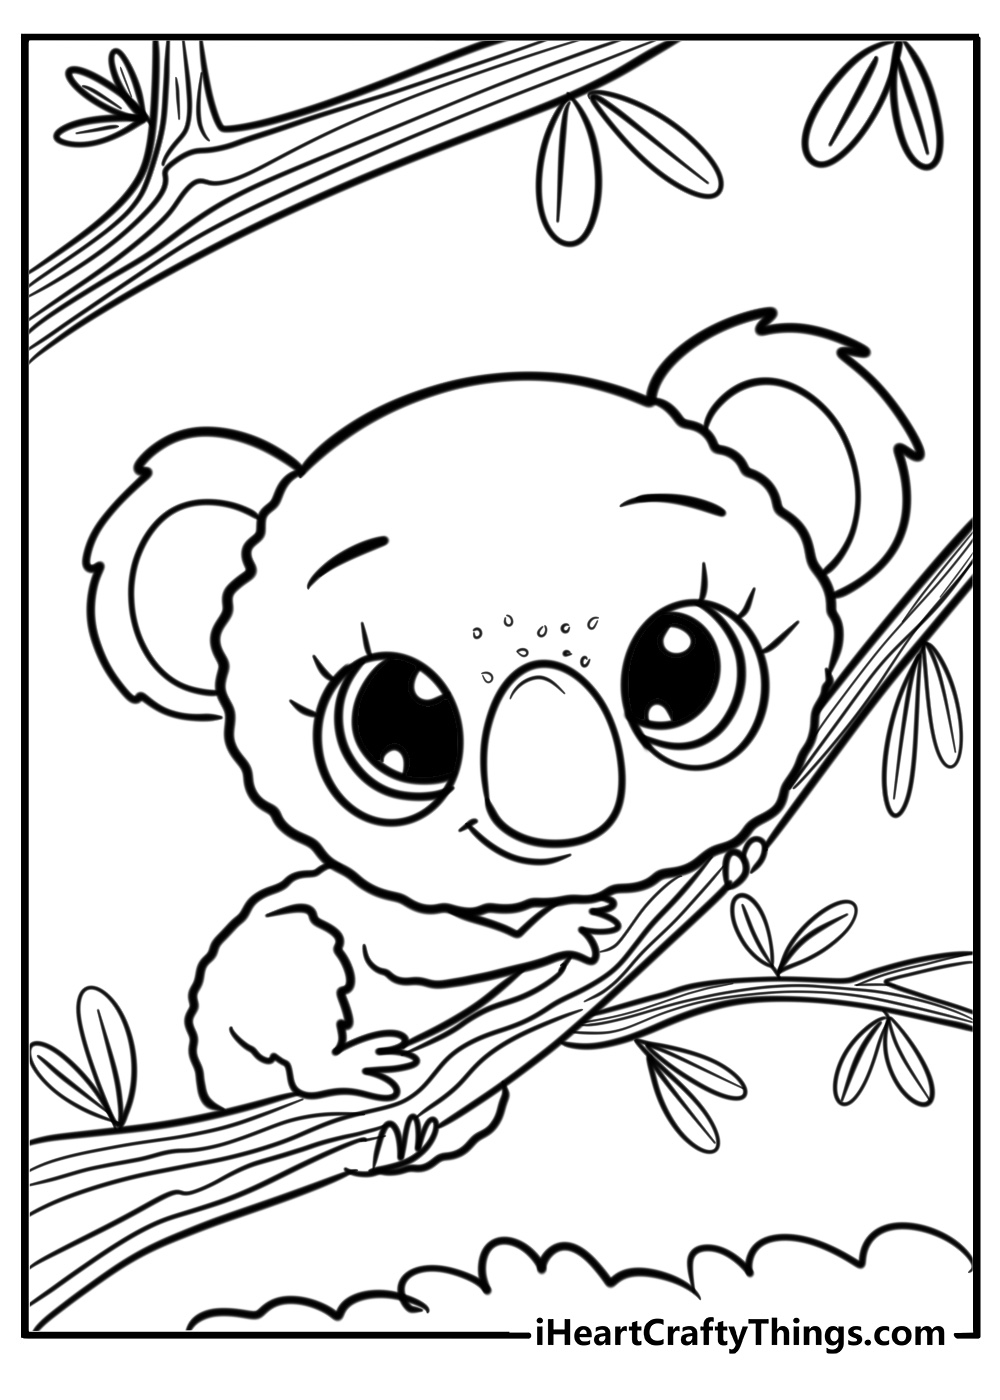 Cute animals coloring page of adorable koala outline